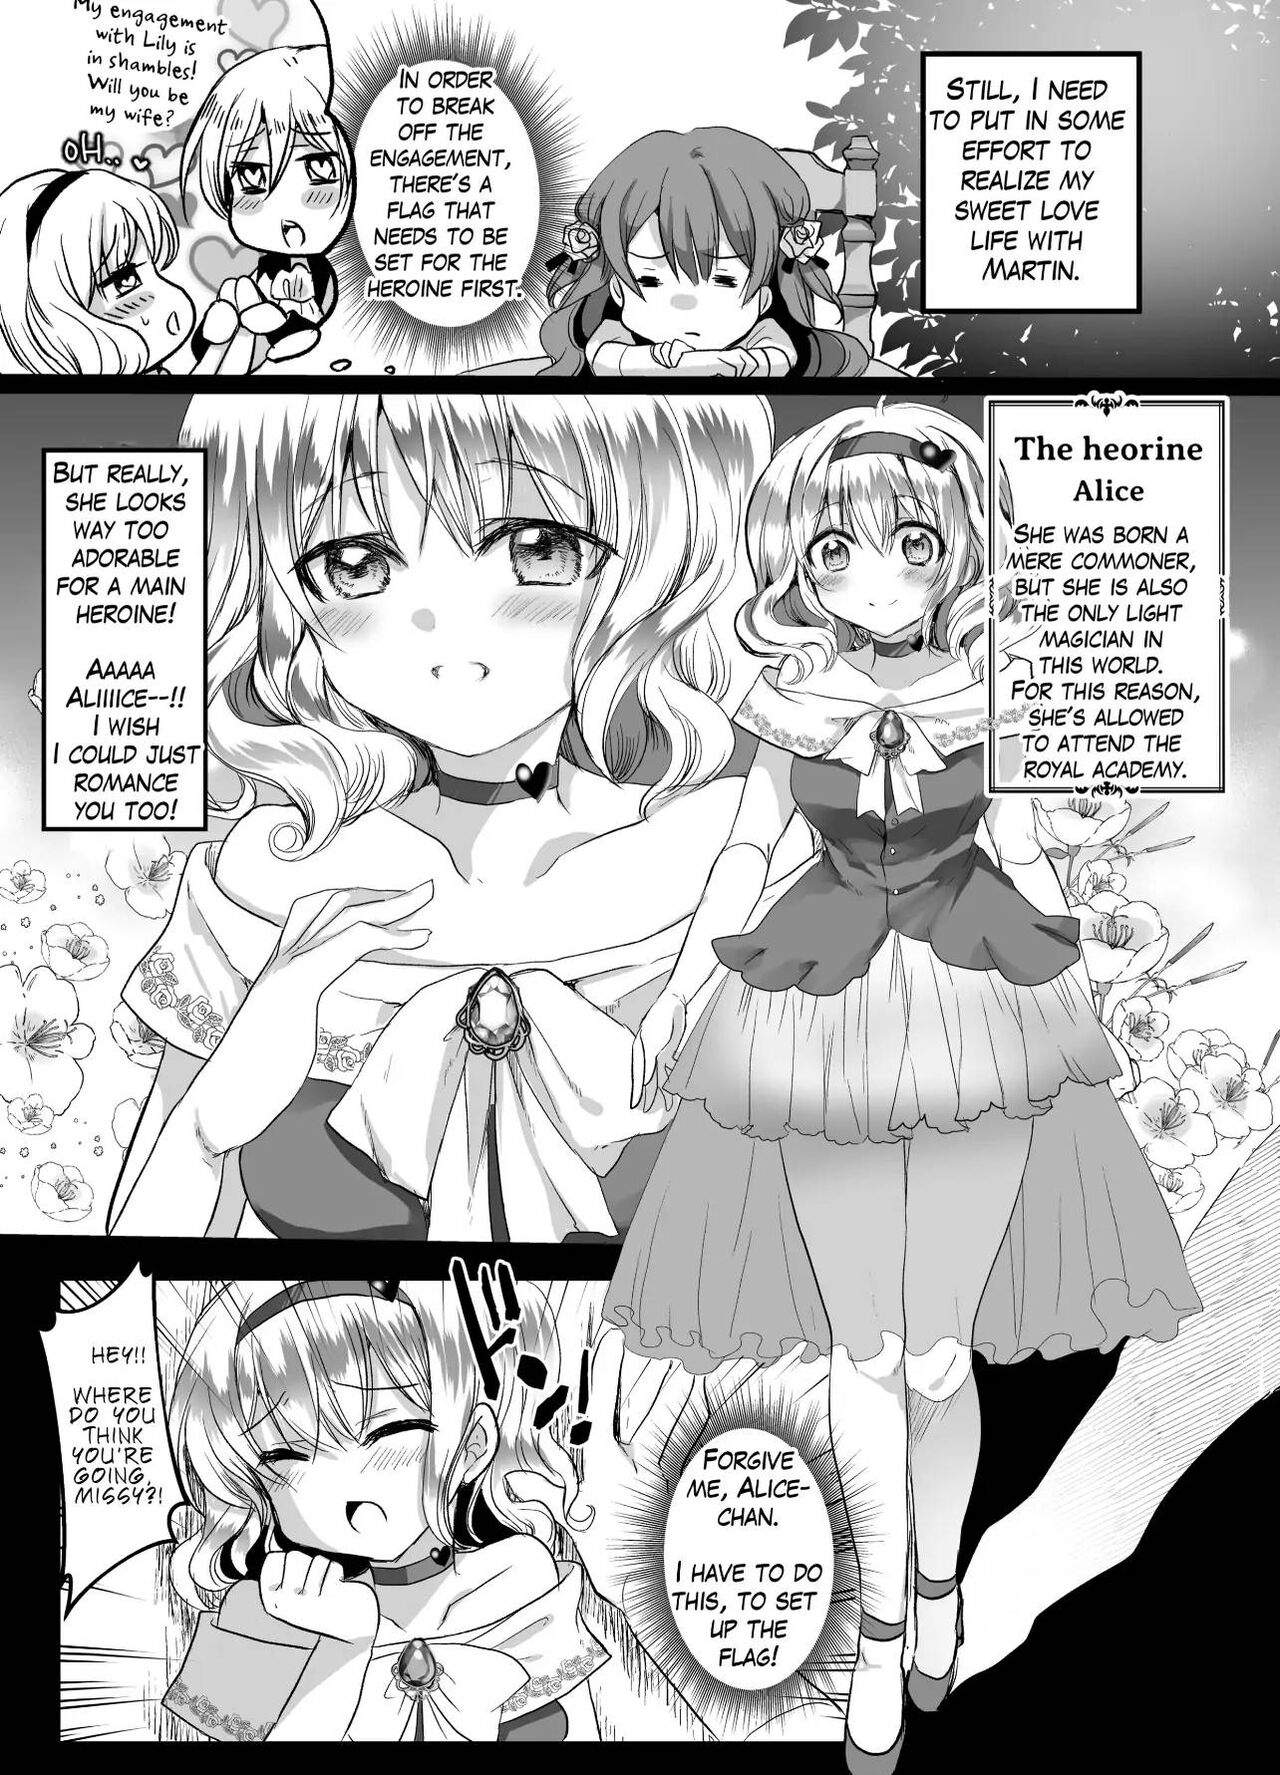 [Whisker Pad (Mofuo)] JK's Tragic Isekai Reincarnation as the Villainess ~But My Precious Side Character!~ [English] [Digital] 10